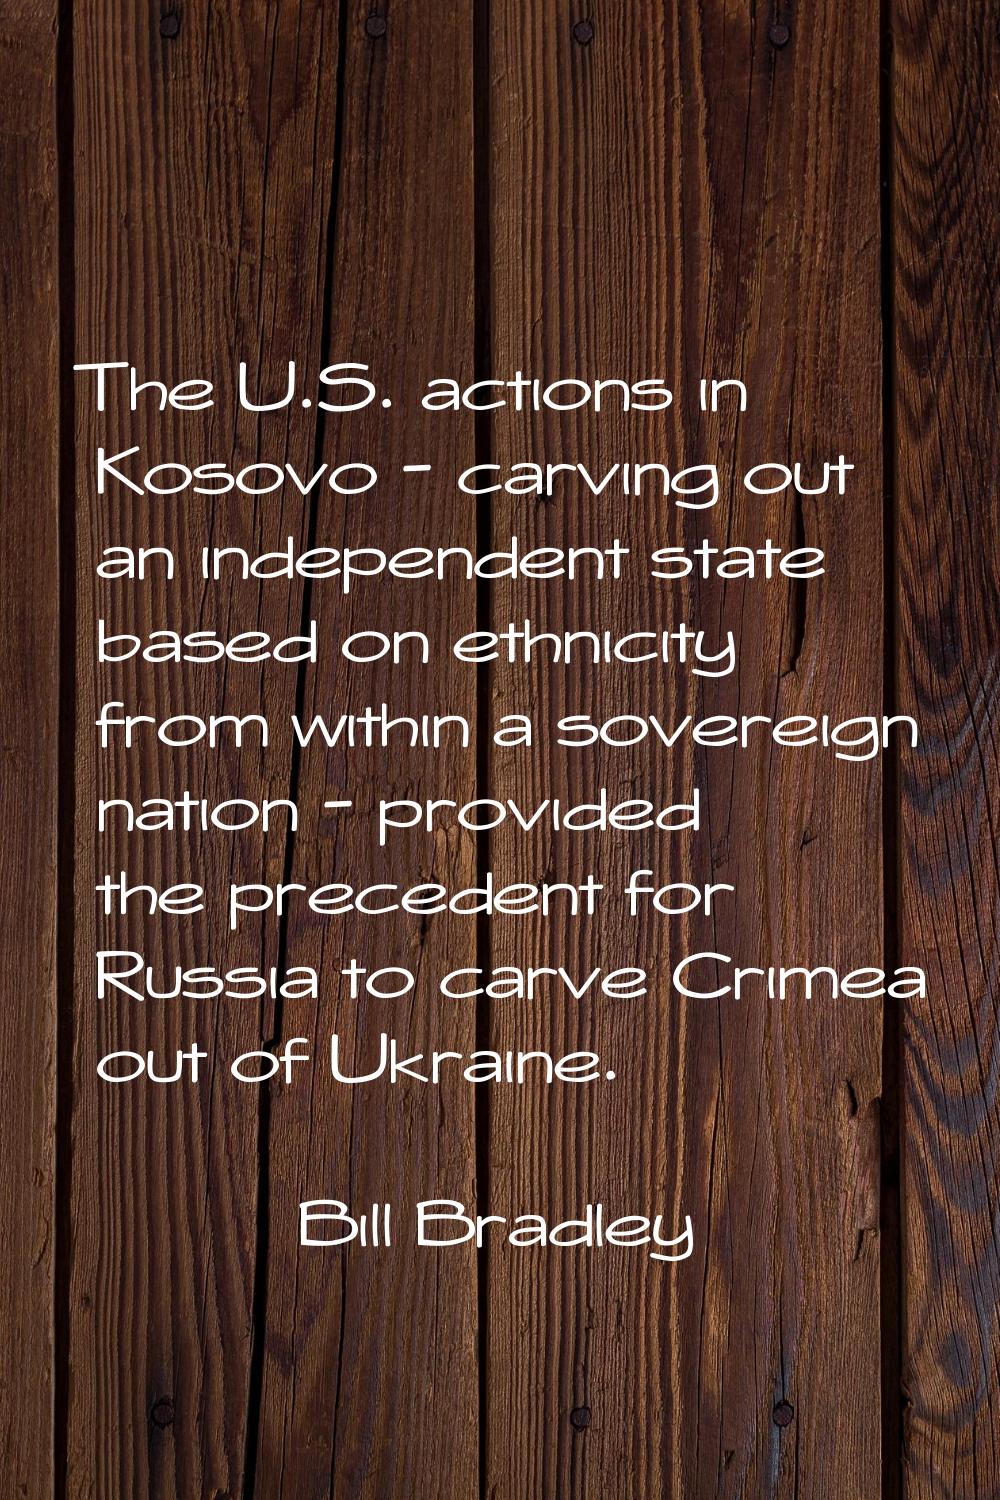 The U.S. actions in Kosovo - carving out an independent state based on ethnicity from within a sove